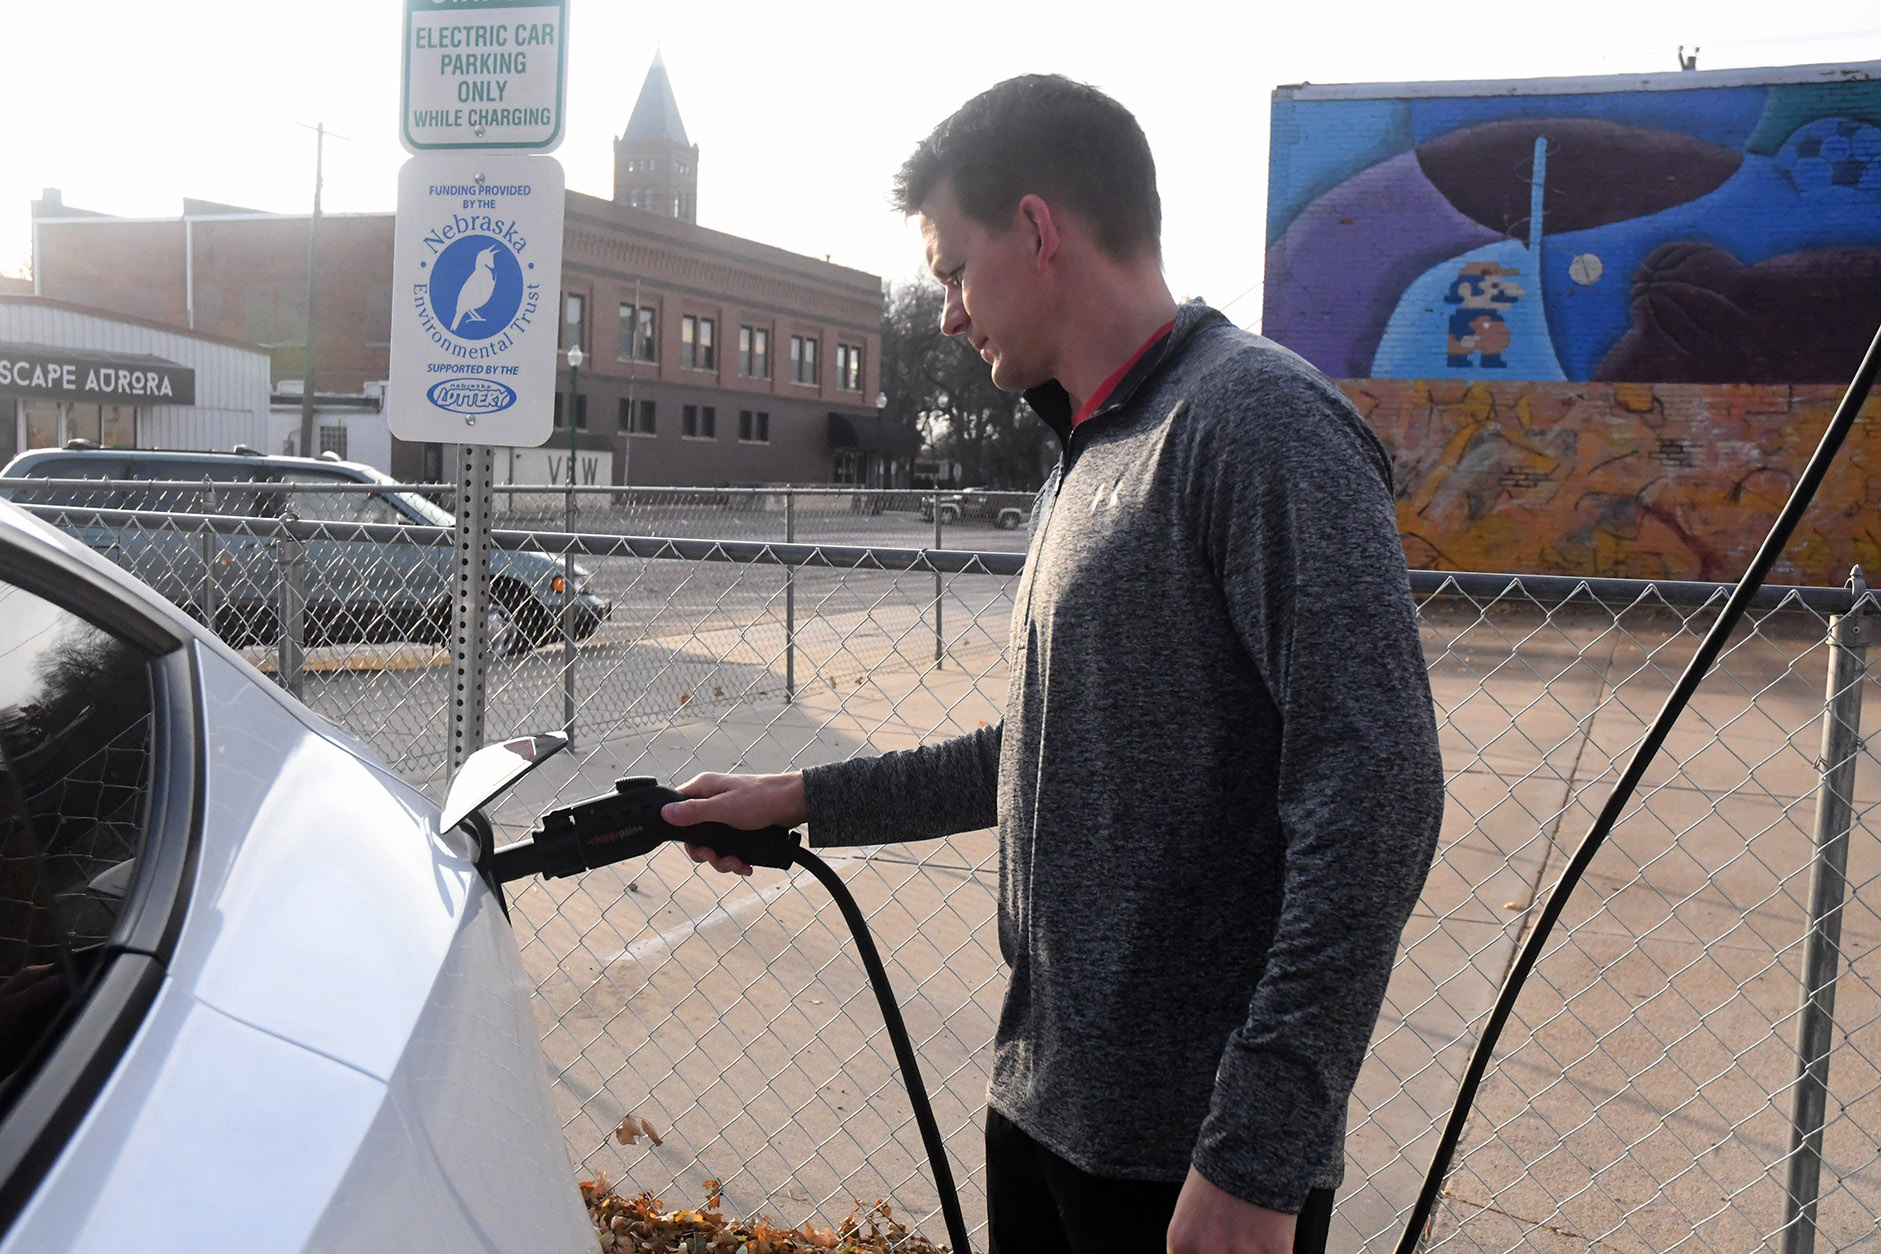 Aurora welcomes 2nd electric vehicle charging station